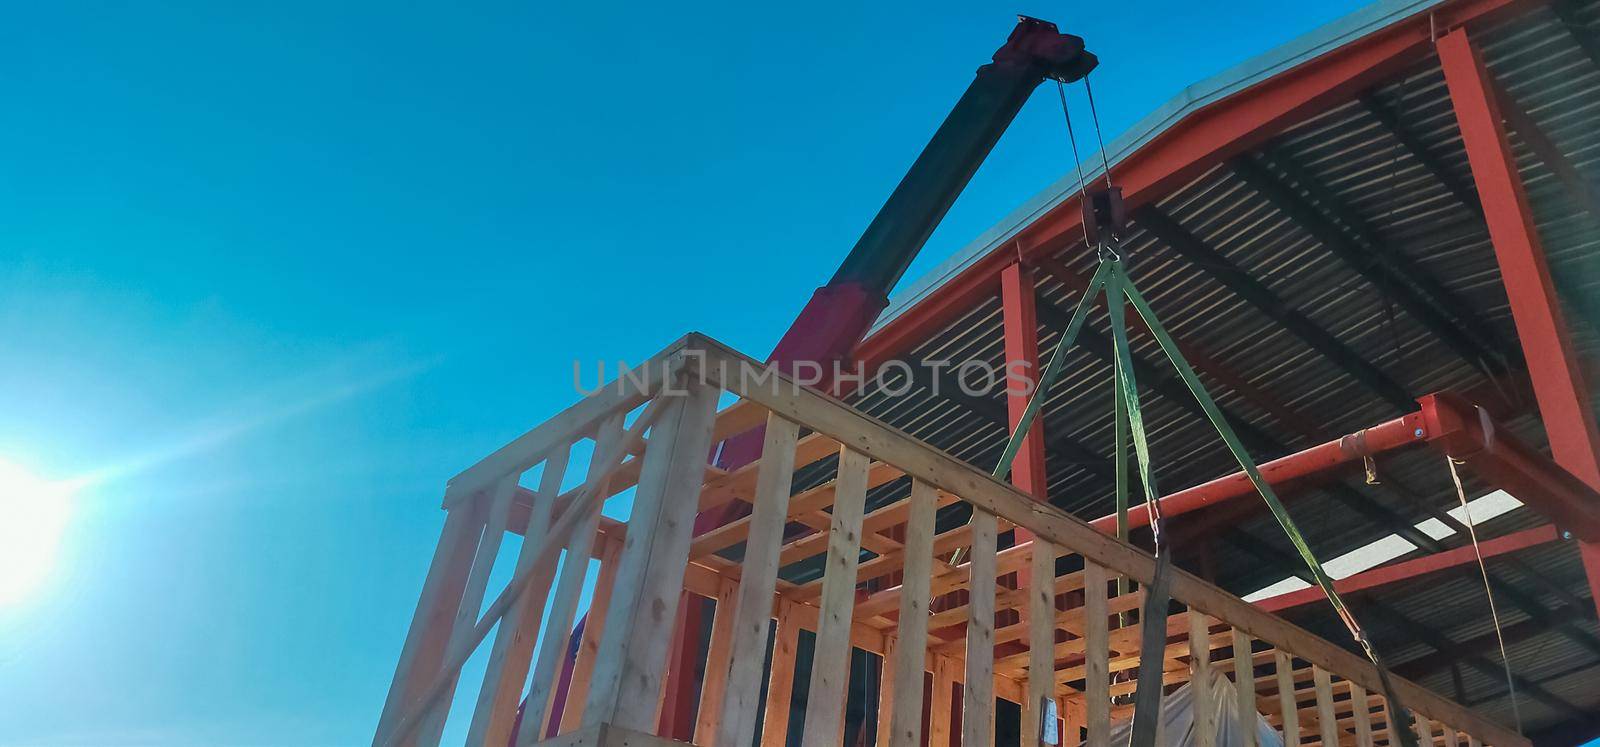 Boom truck crane lifting the machinery which storage in wooden box to stored in warehouse. Machinery transport and delivery business. Boom truck crane working at job site. Crane hoisting wooden box. by Fahroni